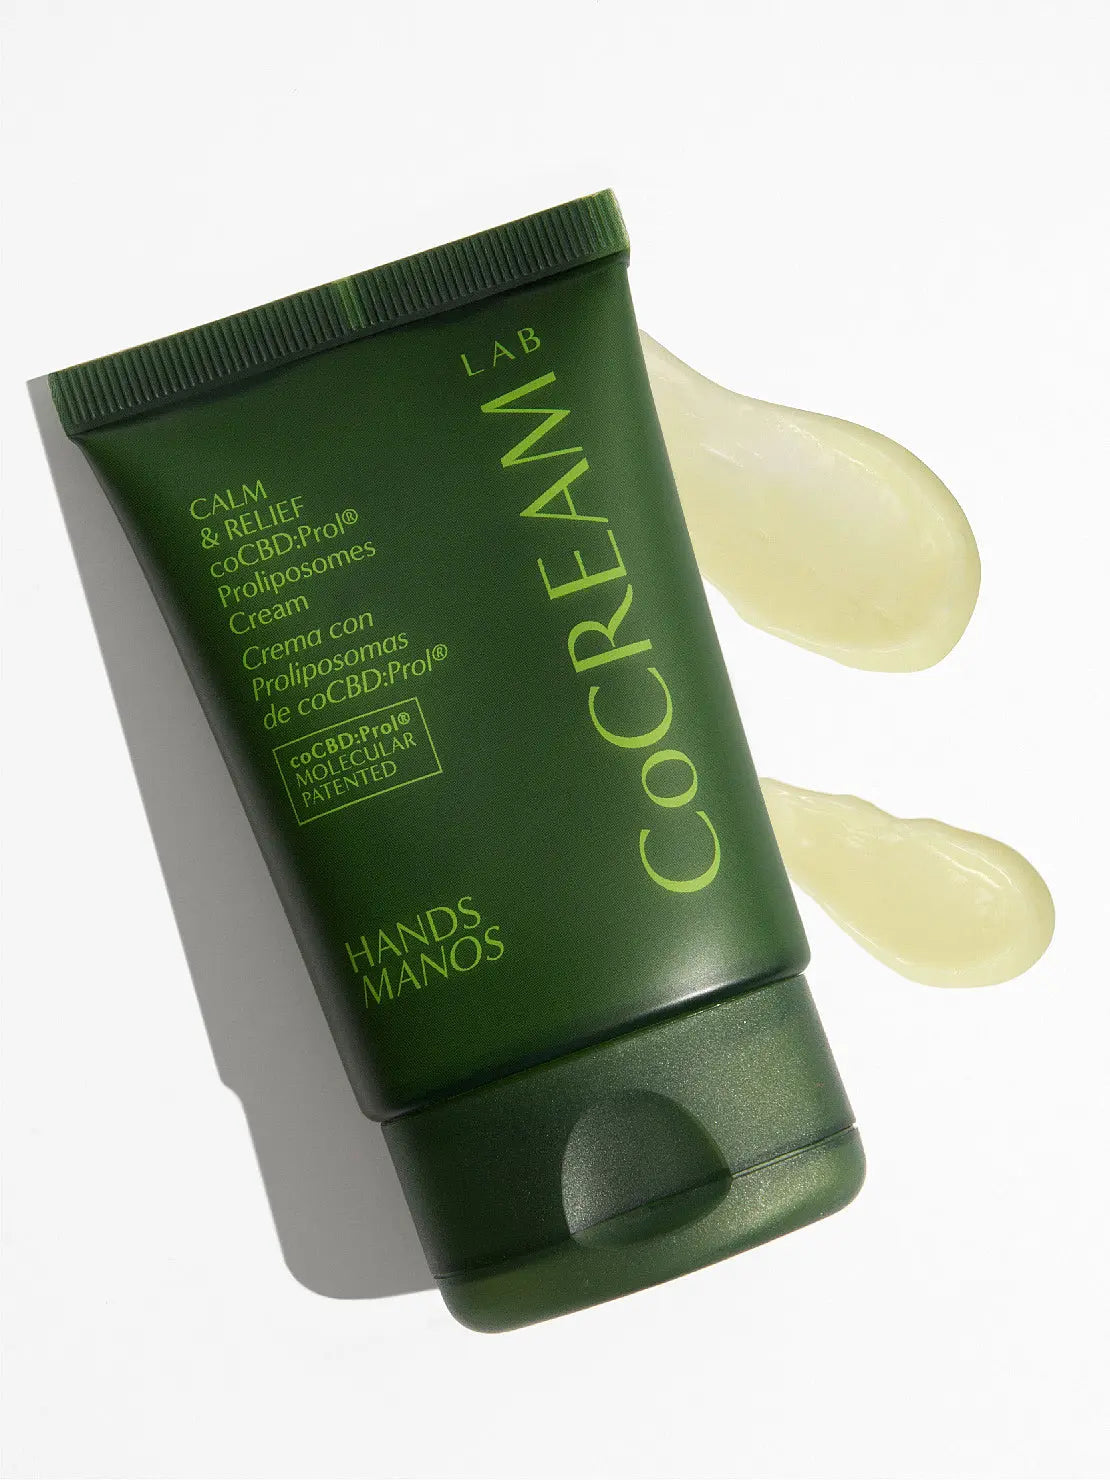 Green tube of Hands Cream 50ml by CoCream Lab, featuring a logo and text detailing it as a hand cream with "Calma & relief eccd-pro" Prolipsomes Cream formula. The tube, available at Bassalstore in Barcelona, has a flip-top cap and is standing upright against a plain background.